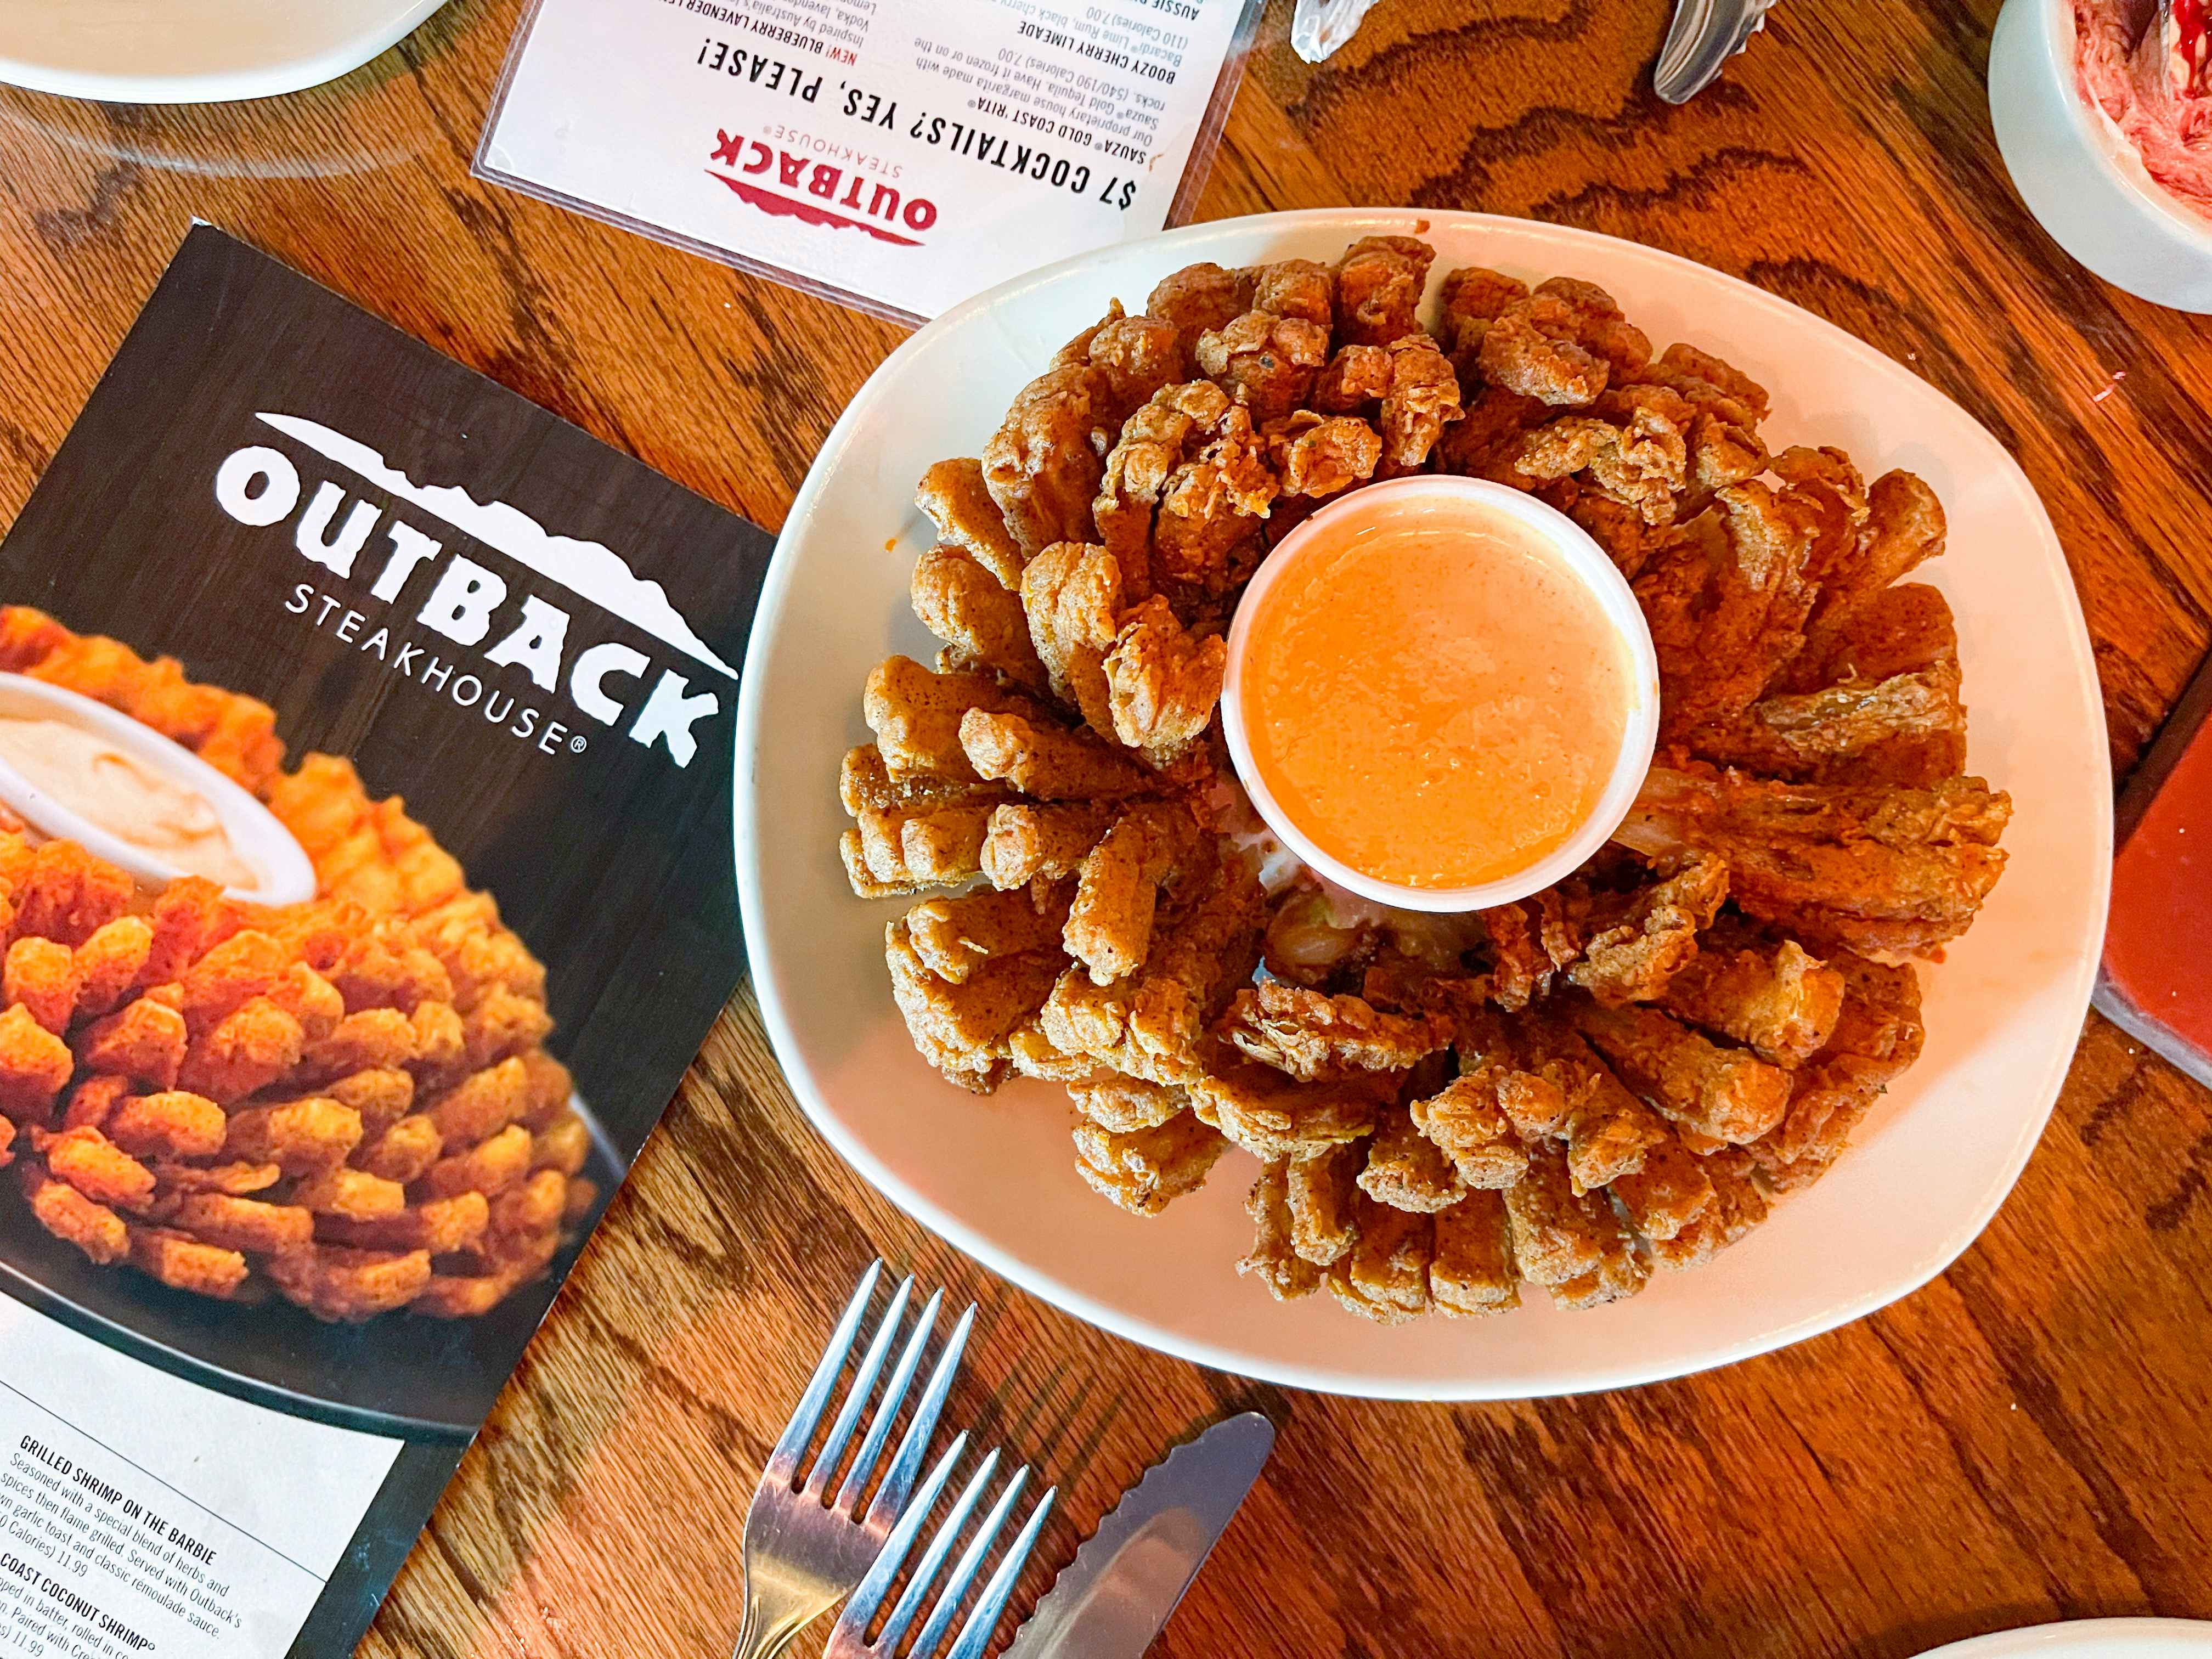 A Blooming Onion served on a table next to an Outback Steakhouse menu